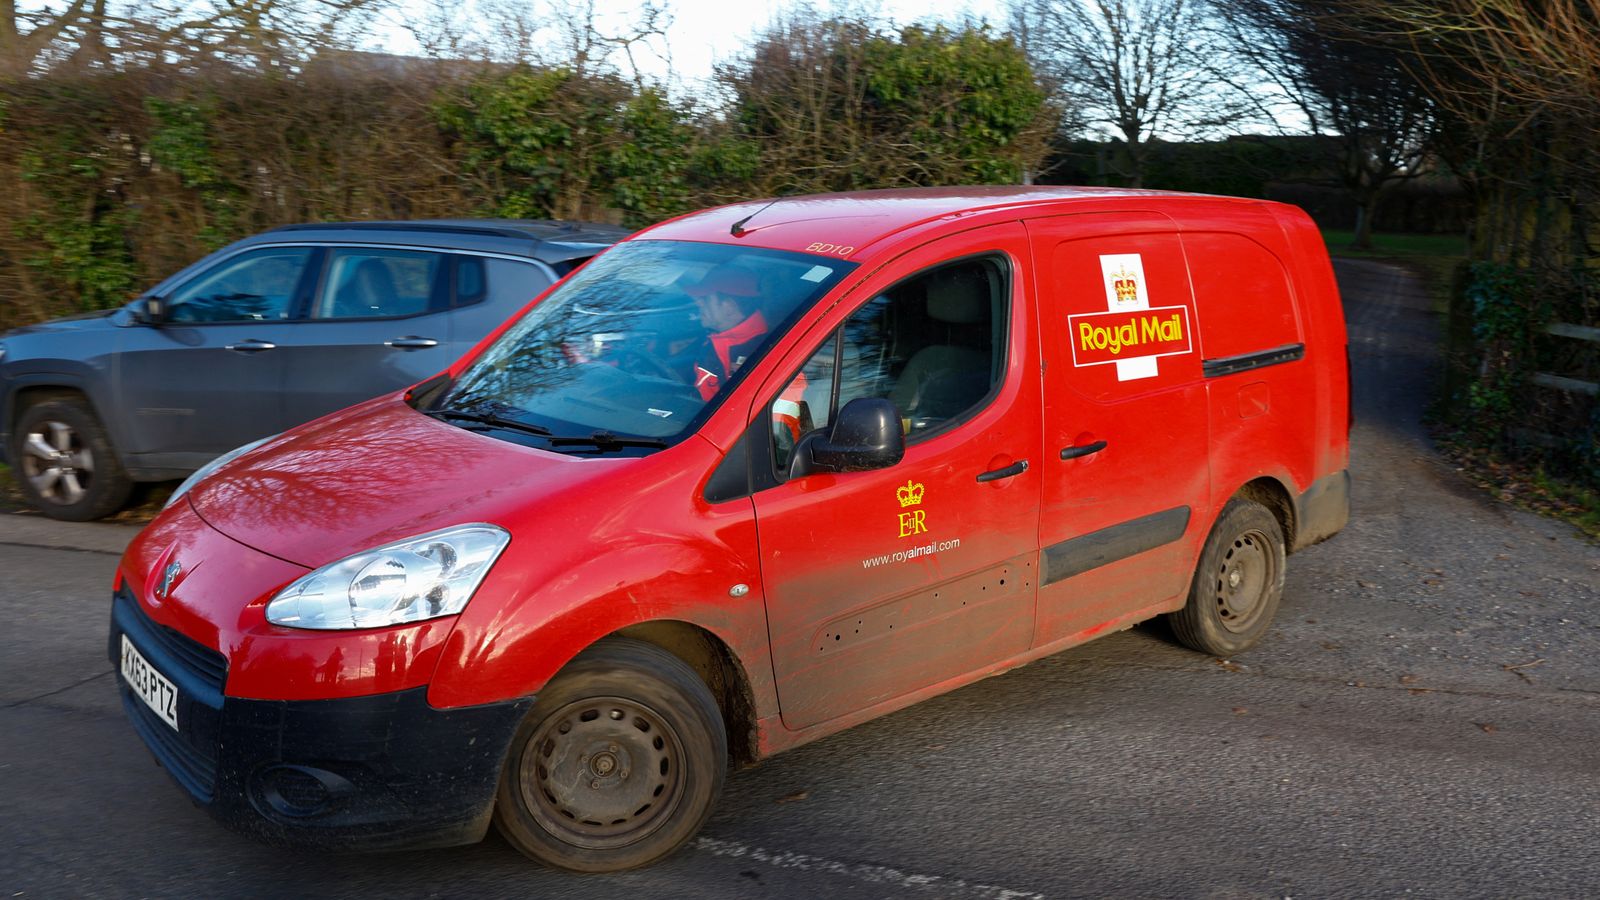 Royal Mail service review 'predetermined', union leader claims